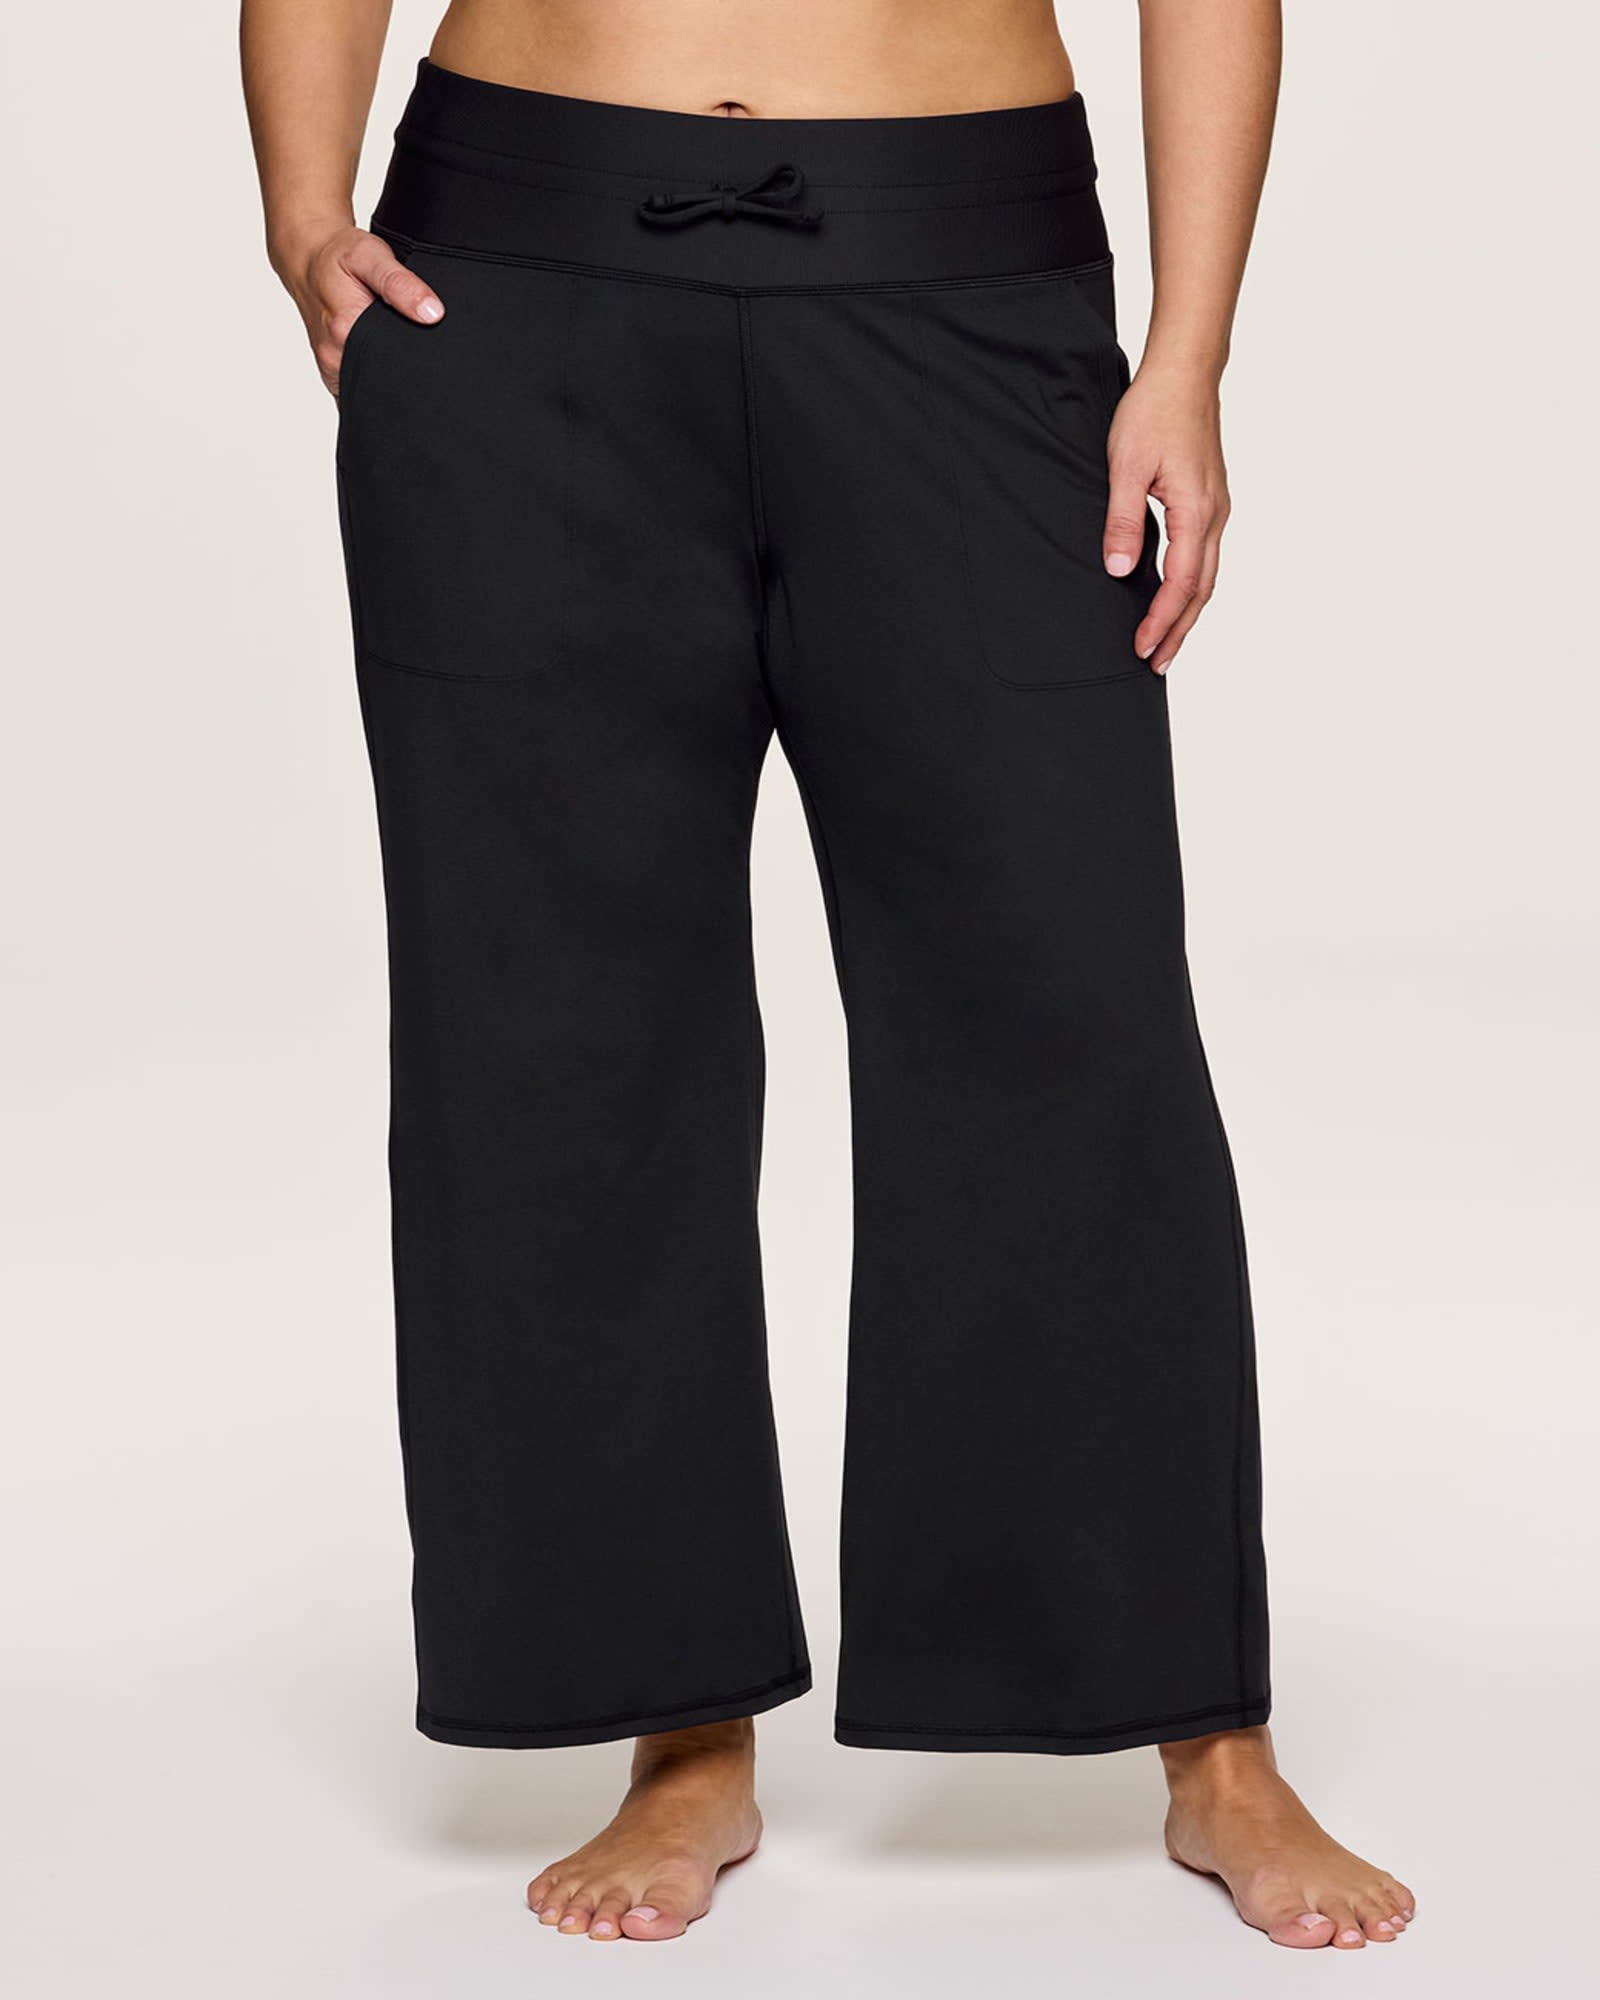 Meet the creator of the Newest Plus Size Hiking Pants - Mappy Hour Blog